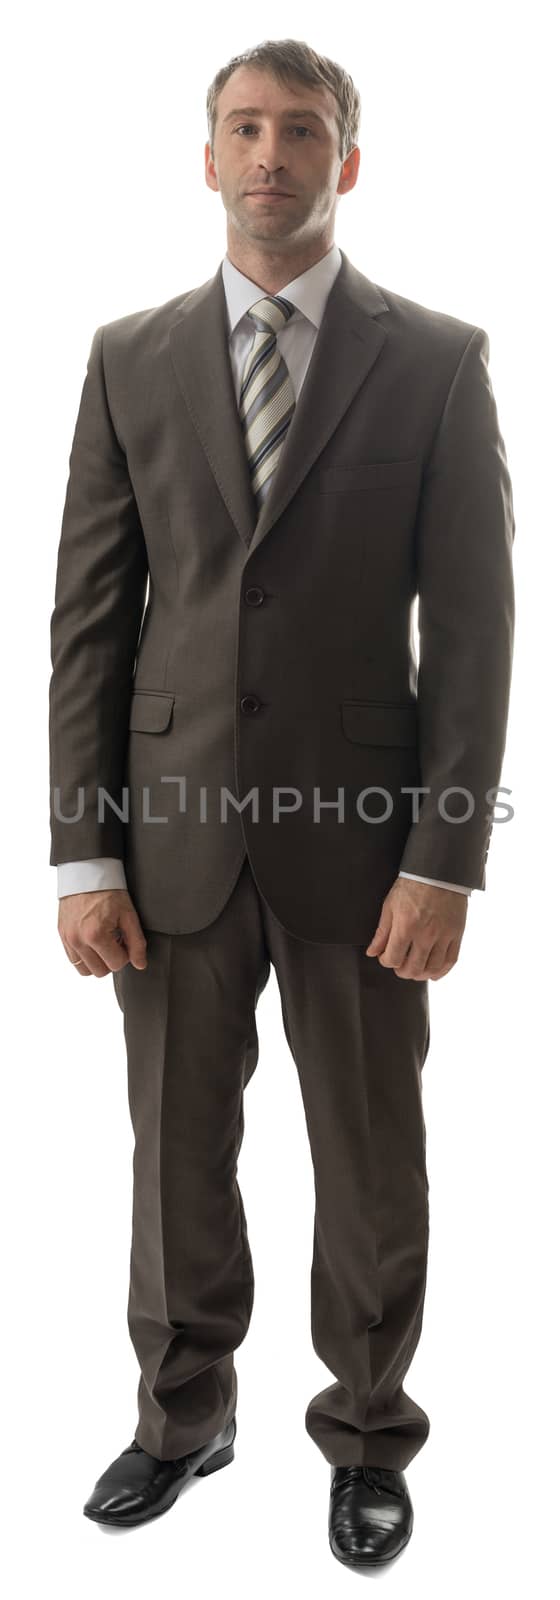 Confidence businessman in suit and tie looking at camera isolated on white background